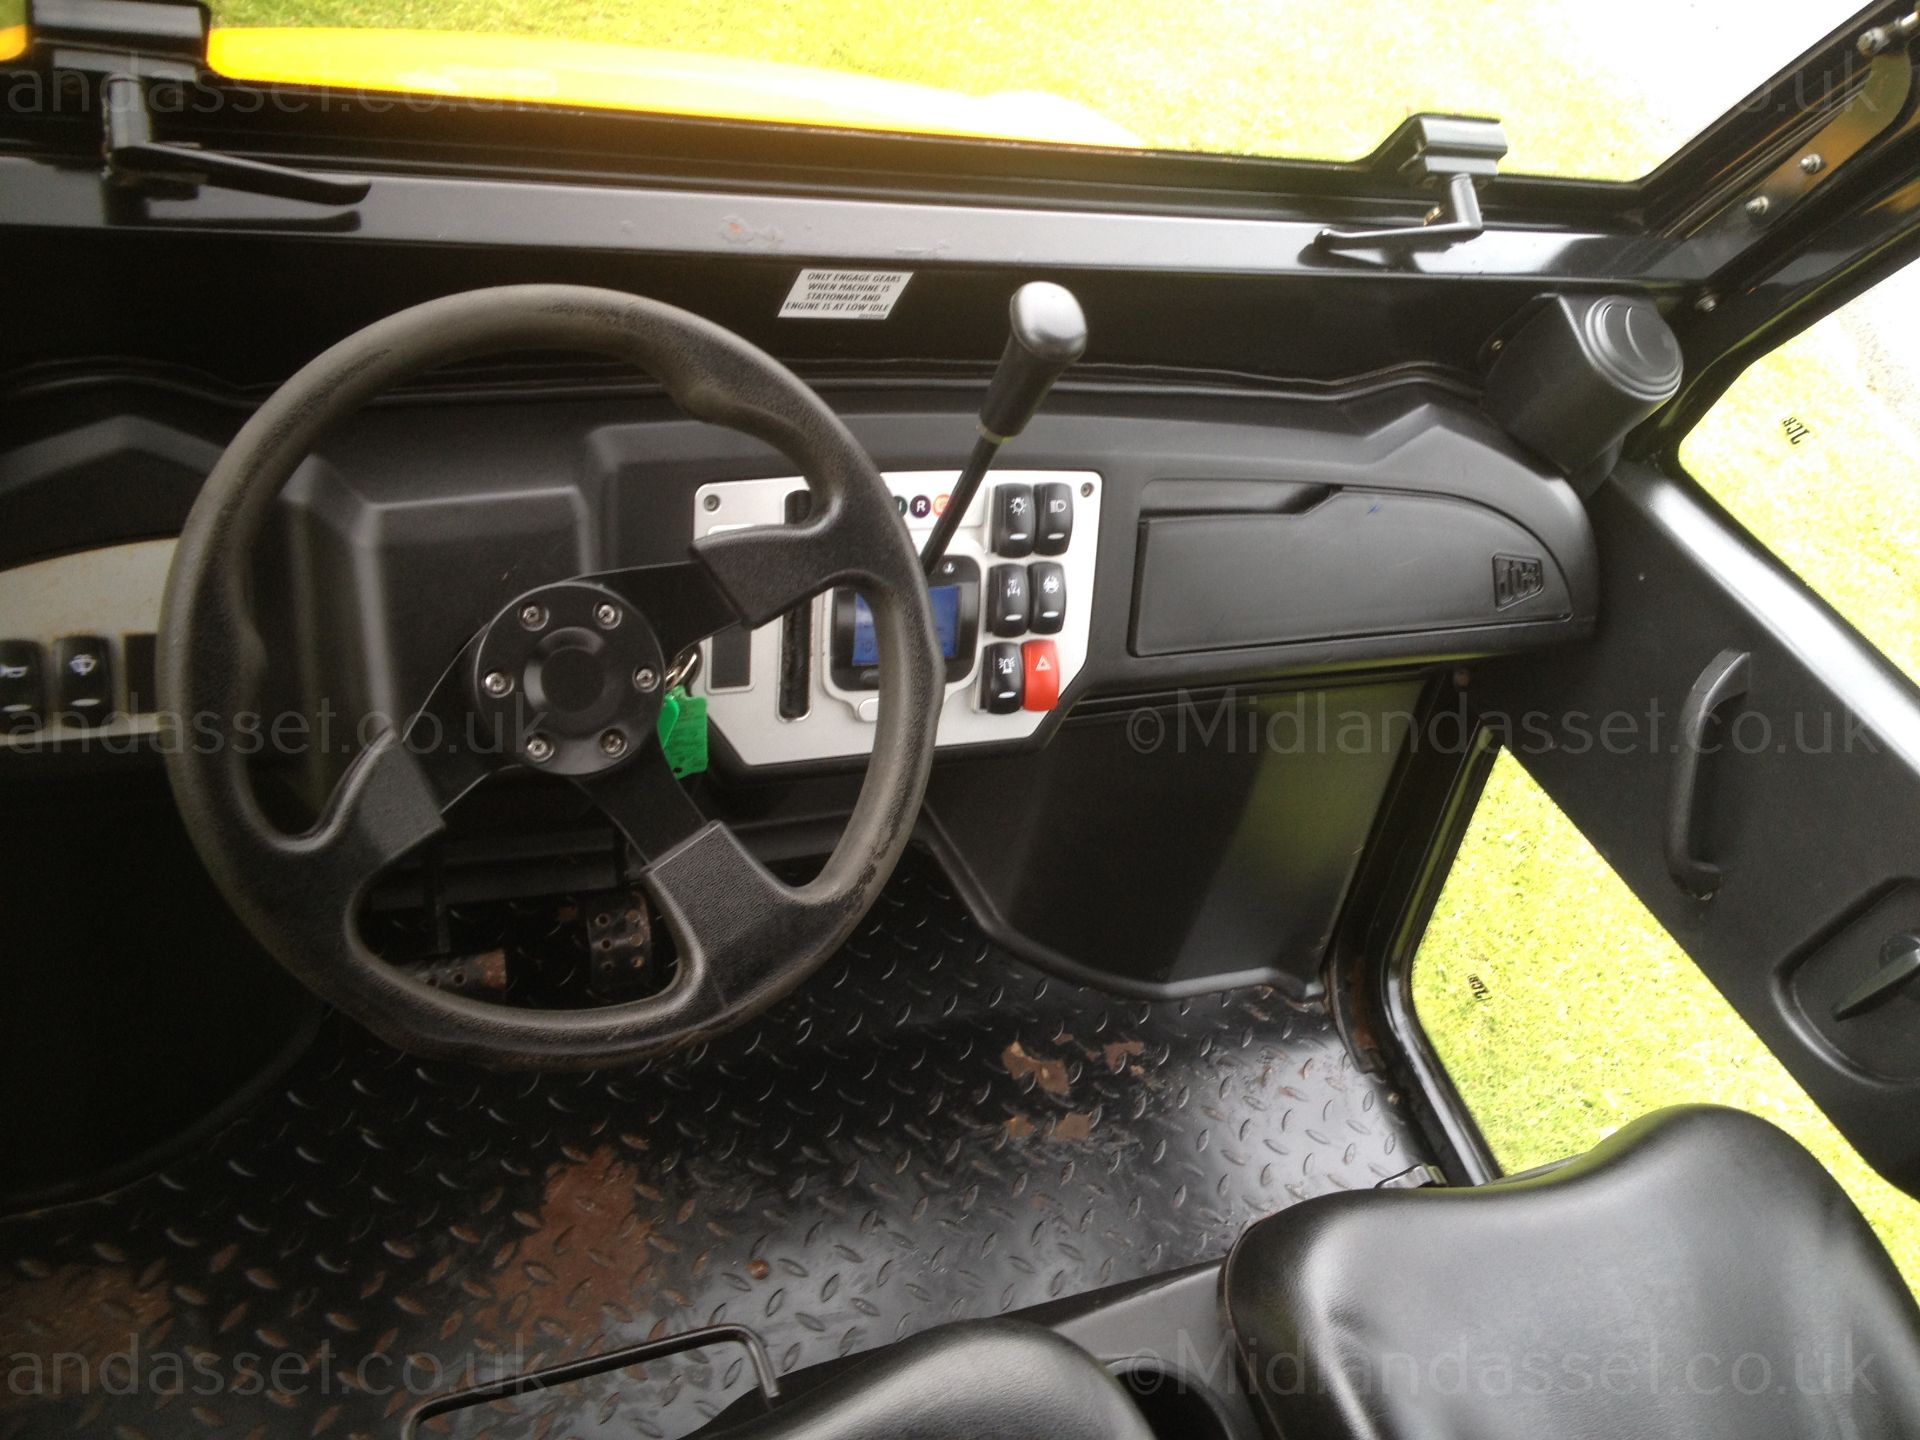 2012 JCB WORKMAX 800D UTILITY VEHICLE - Image 9 of 9